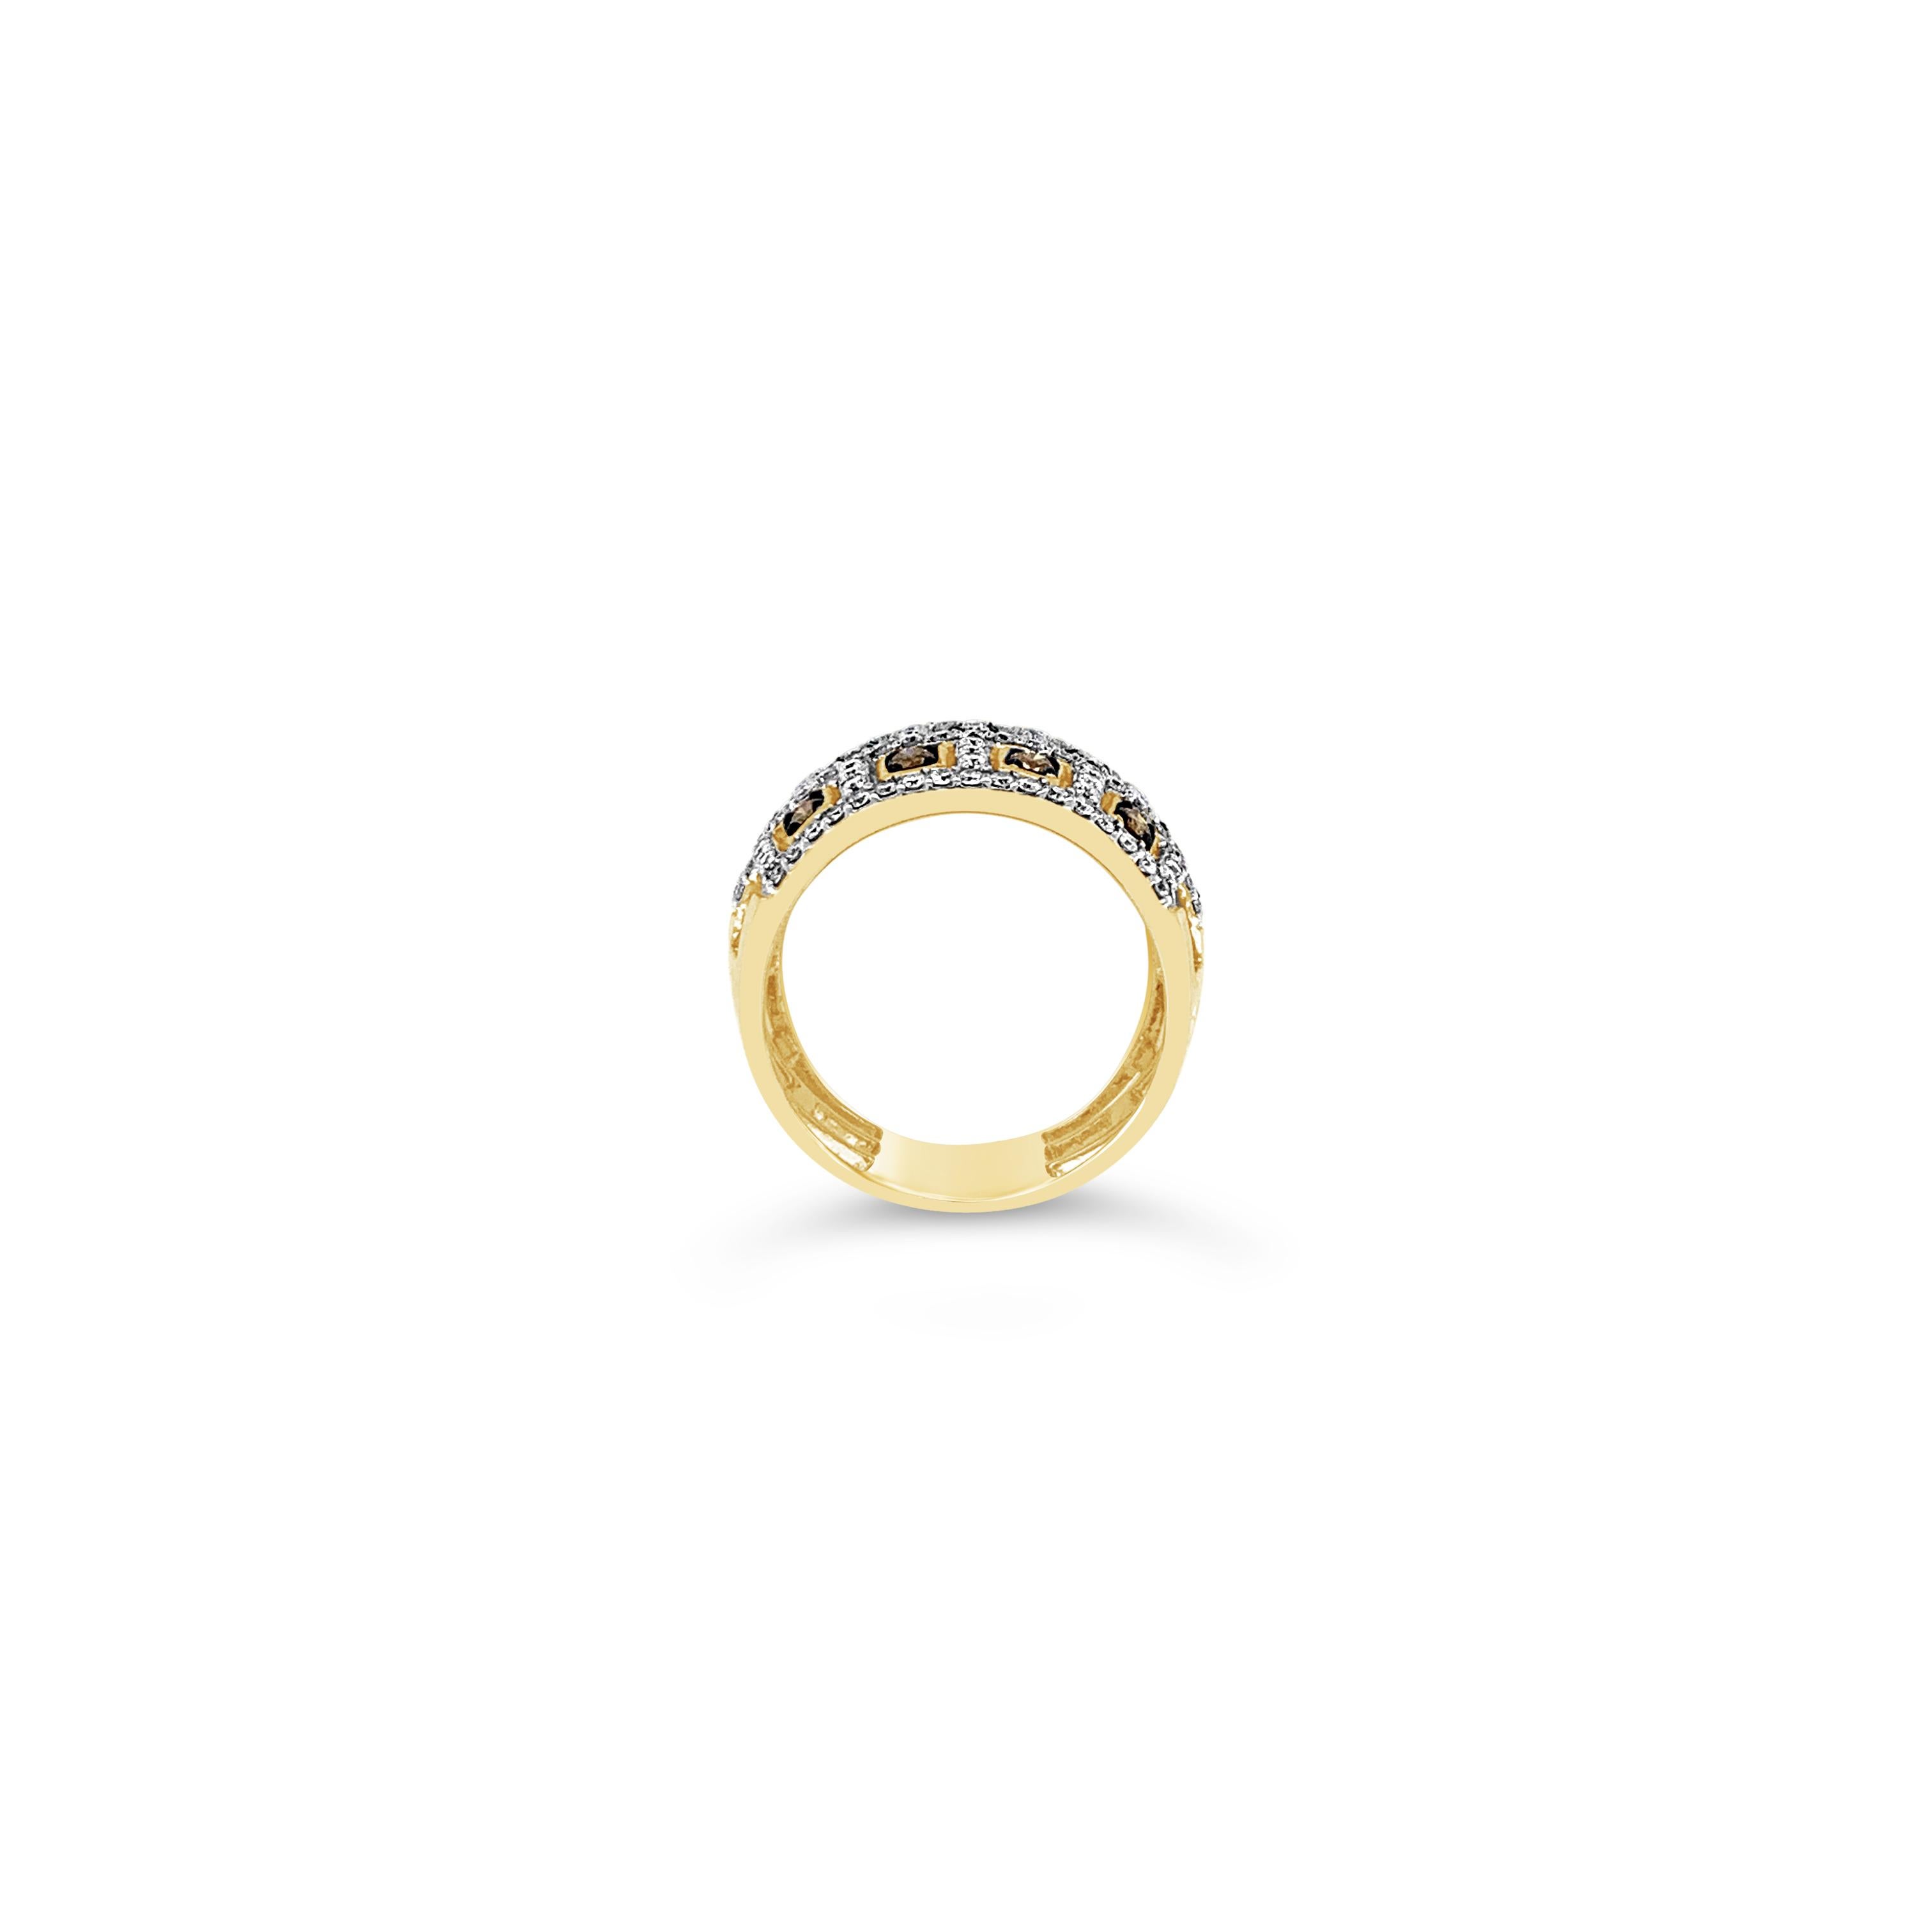 Le Vian® Ring featuring 1/2 cts. Chocolate Diamonds®, 3/4 cts. Vanilla Diamonds® set in 14K Honey Gold™

Diamonds Breakdown:
3/4 cts White Diamonds
1/2 cts Brown Diamonds

Gems Breakdown:
None

Please feel free to reach out with any questions!

Item